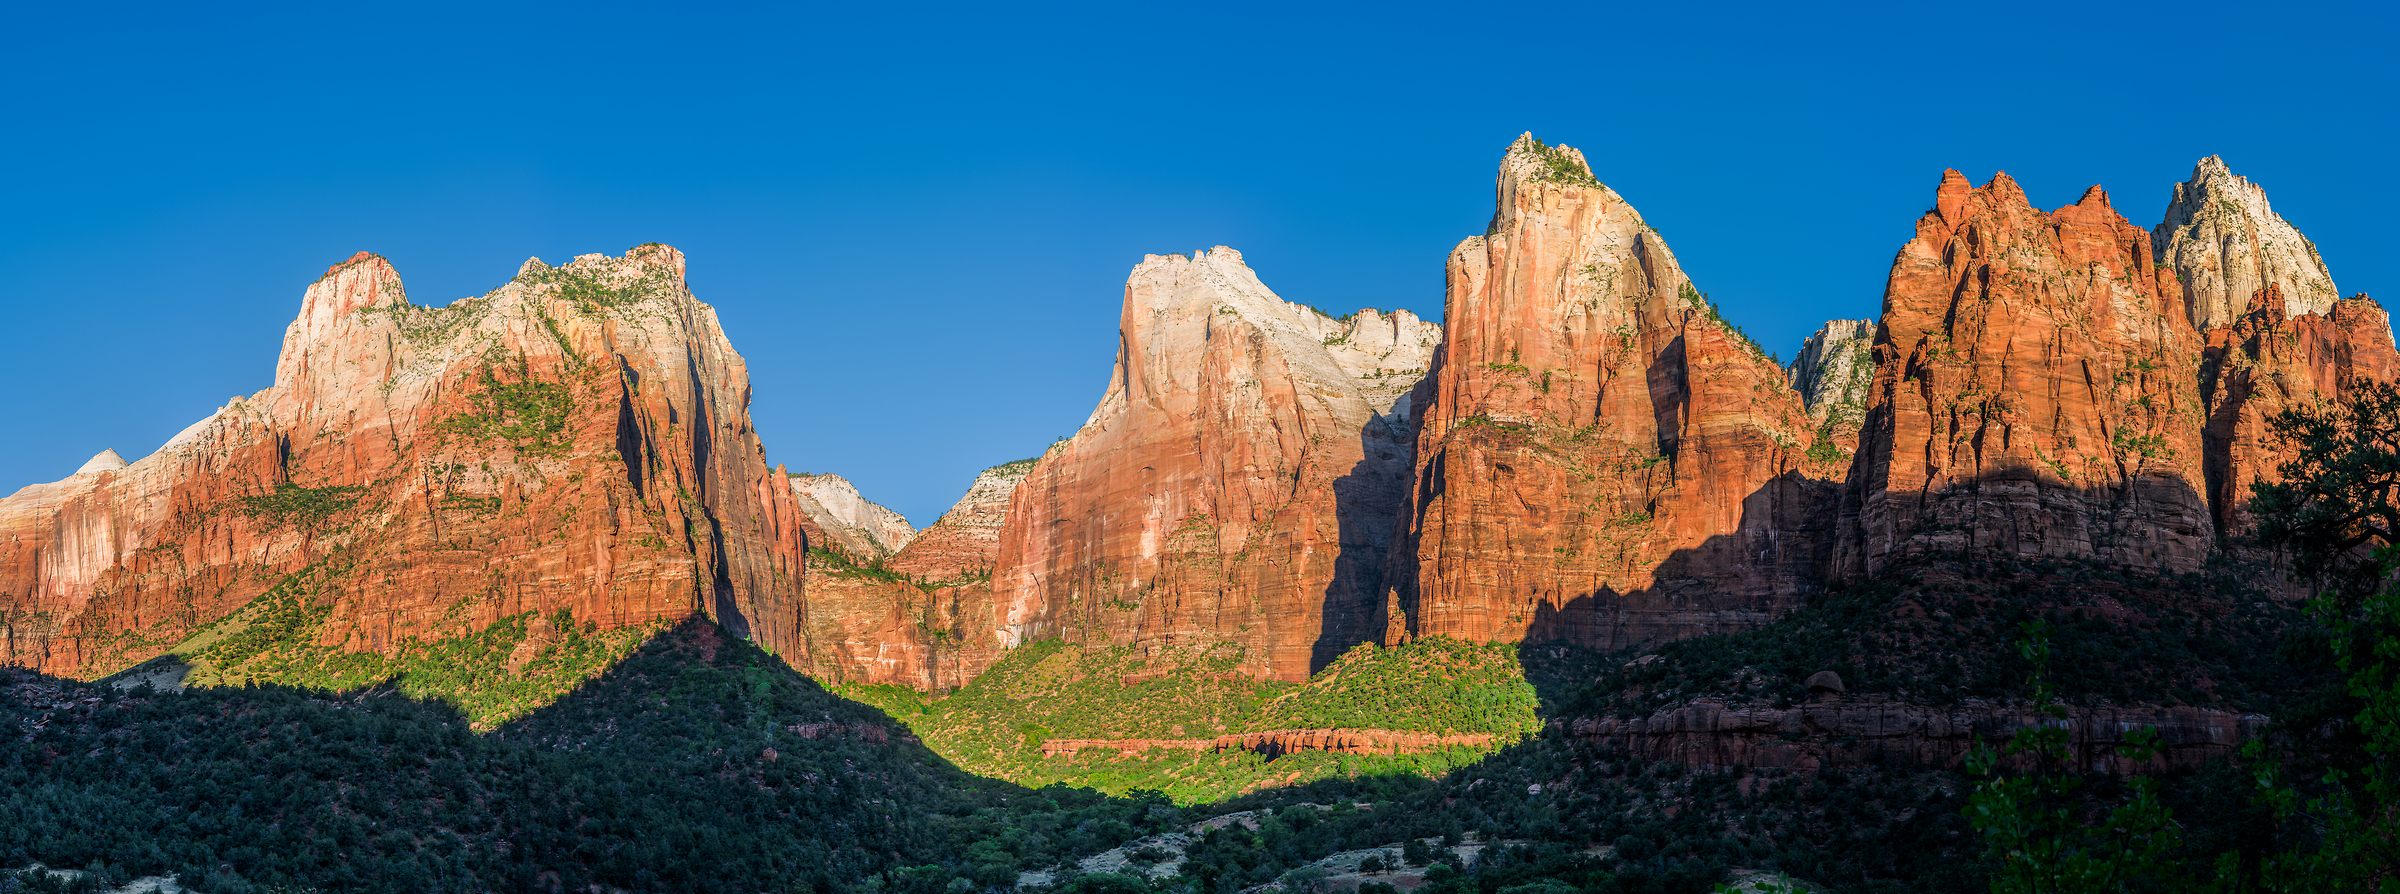 410 megapixels! A very high resolution, large-format landscape photo perfect for a large-format wall covering; landscape photogrpah created by Jim Tarpo in Zion National Park, Utah.